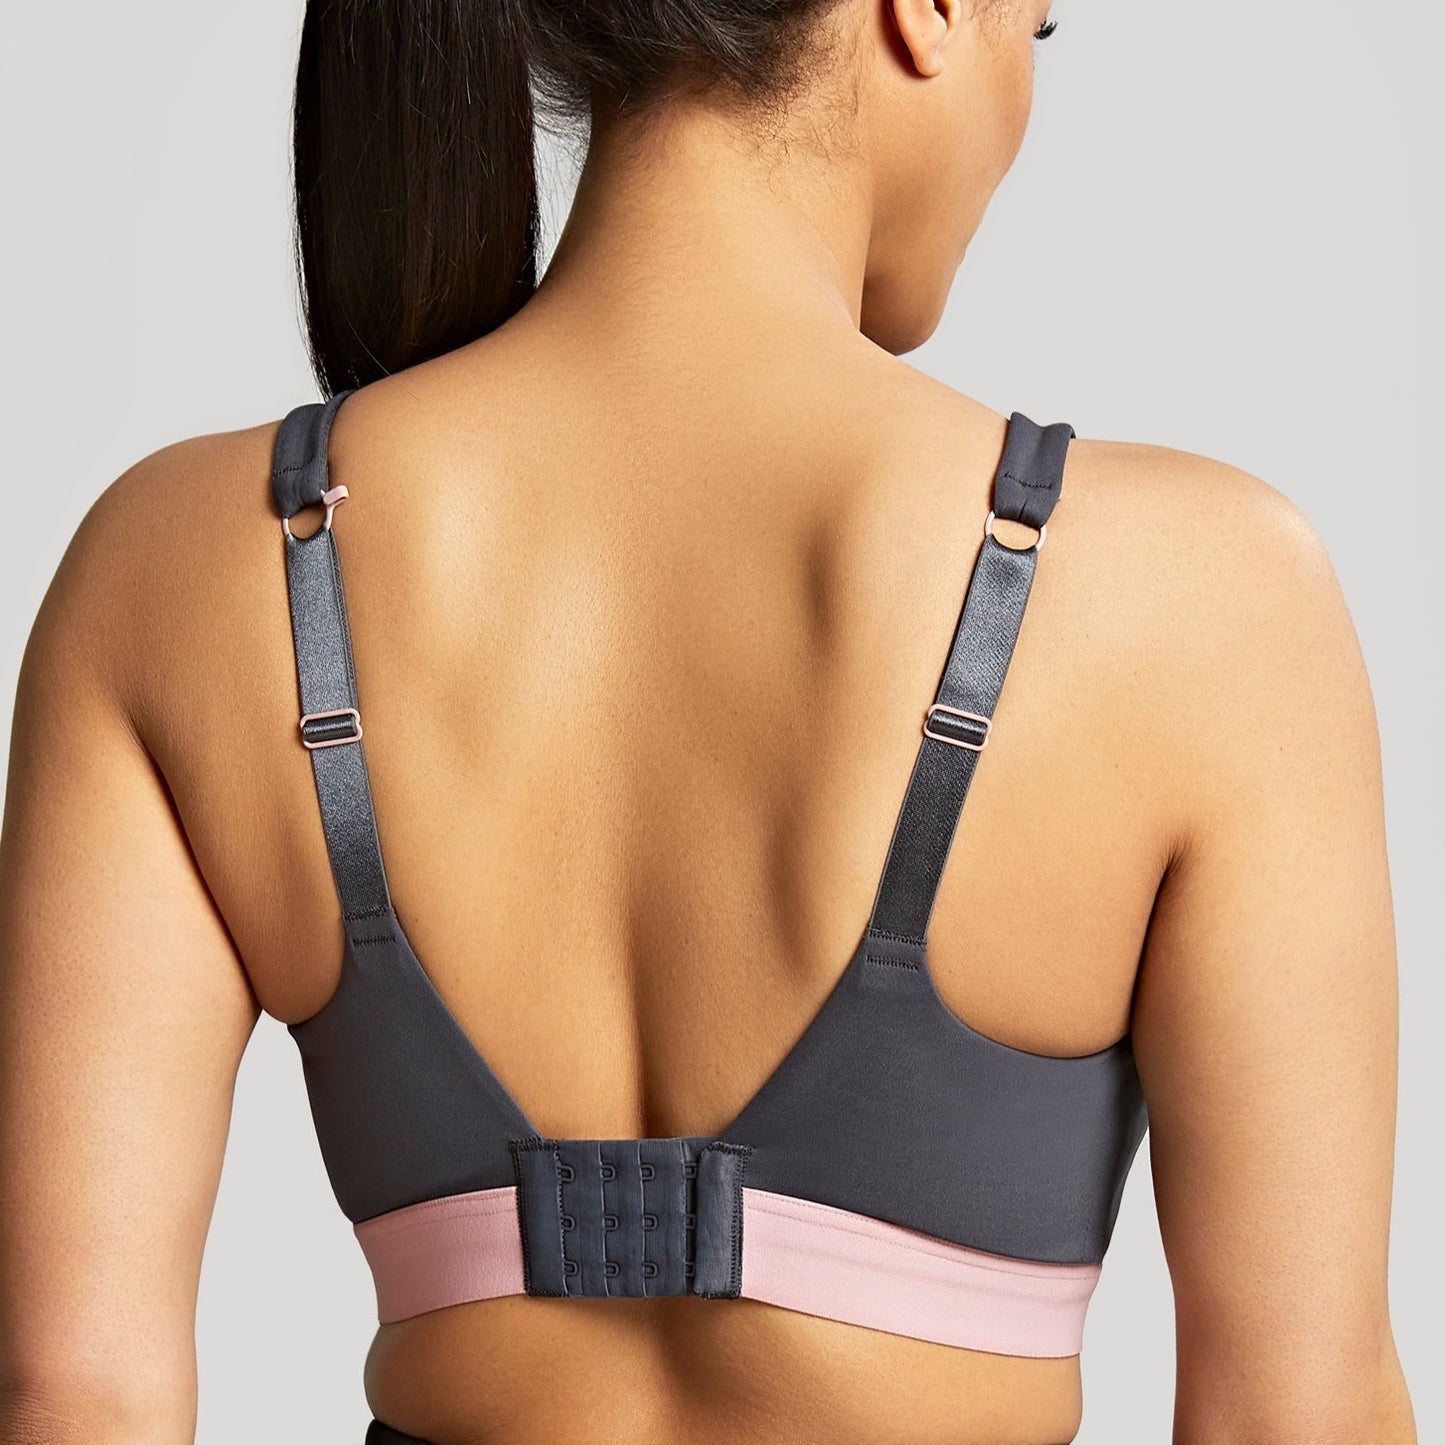 Ultra Perform Non-Padded Wired Sports Bra - 5022 - Charcoal Bras & Lingerie - Bras - Sports Bras Panache   